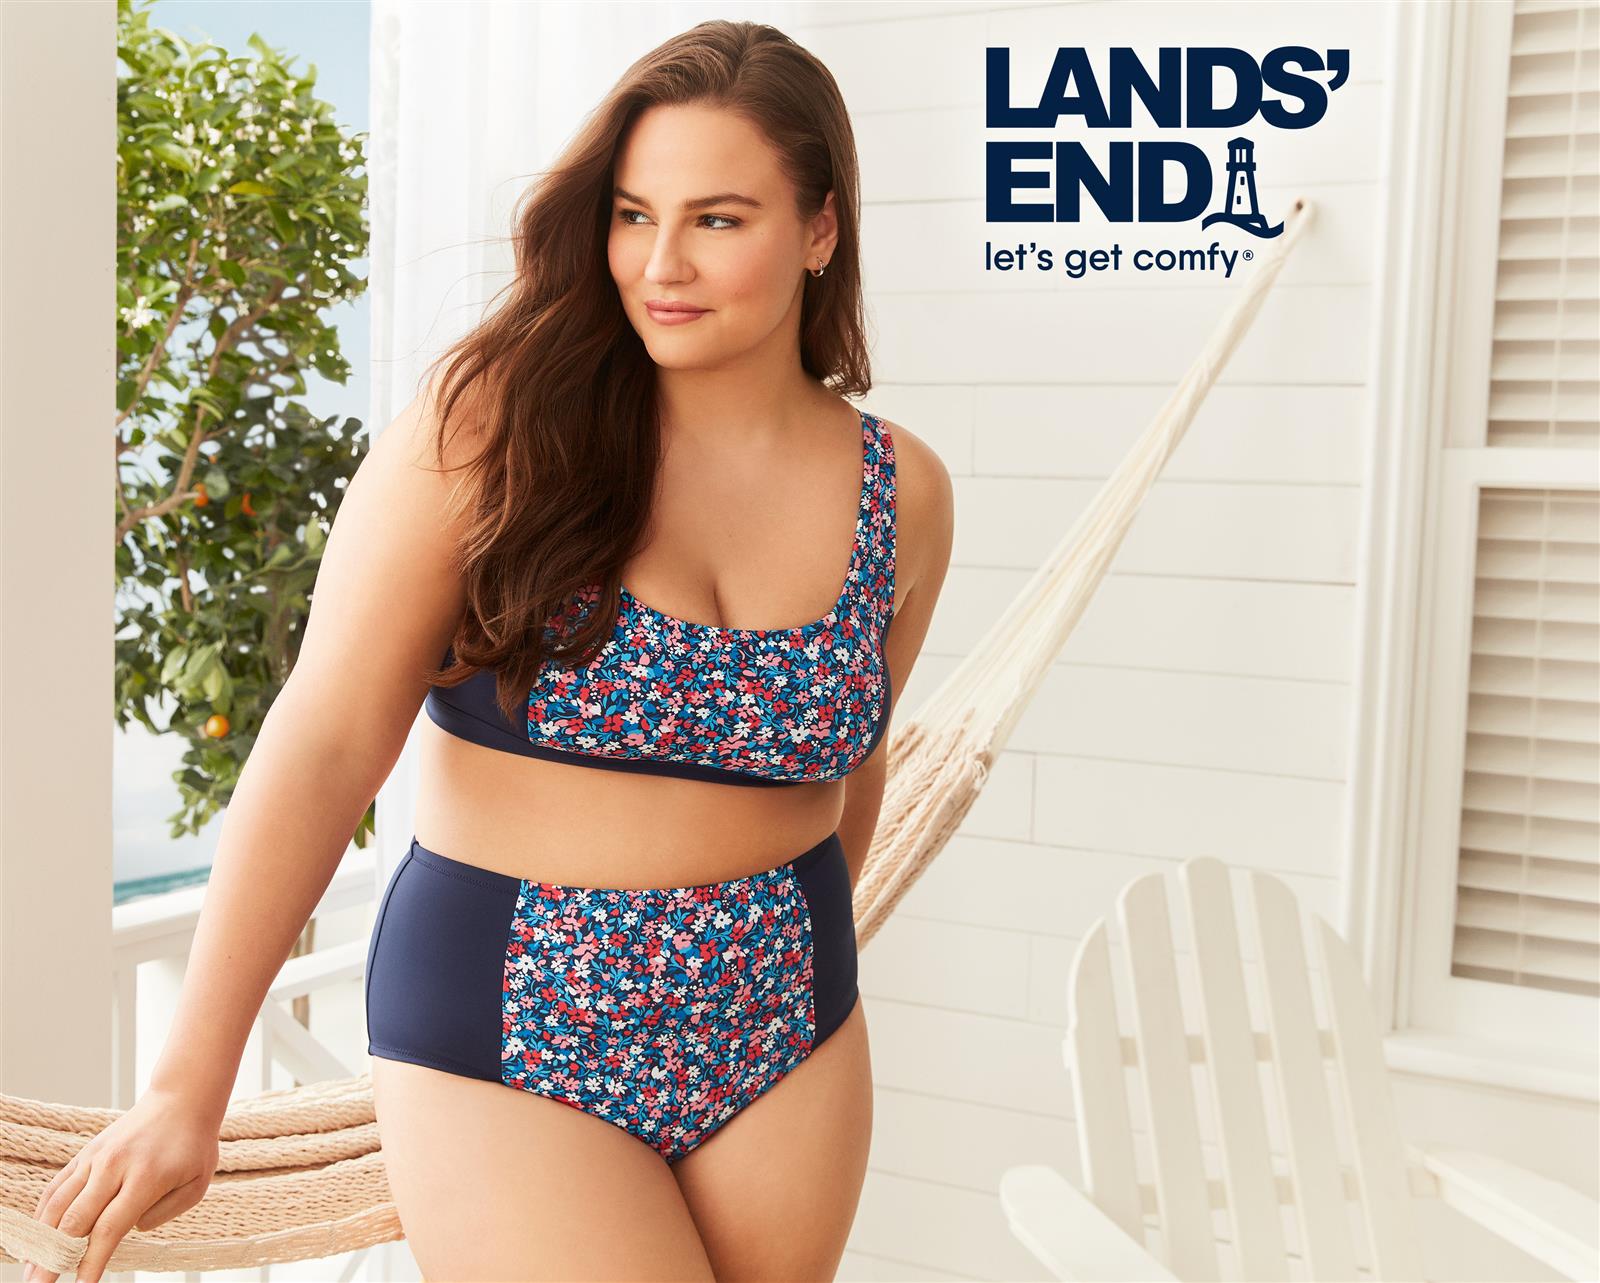 Plus-Size Swimwear for Real Body Types